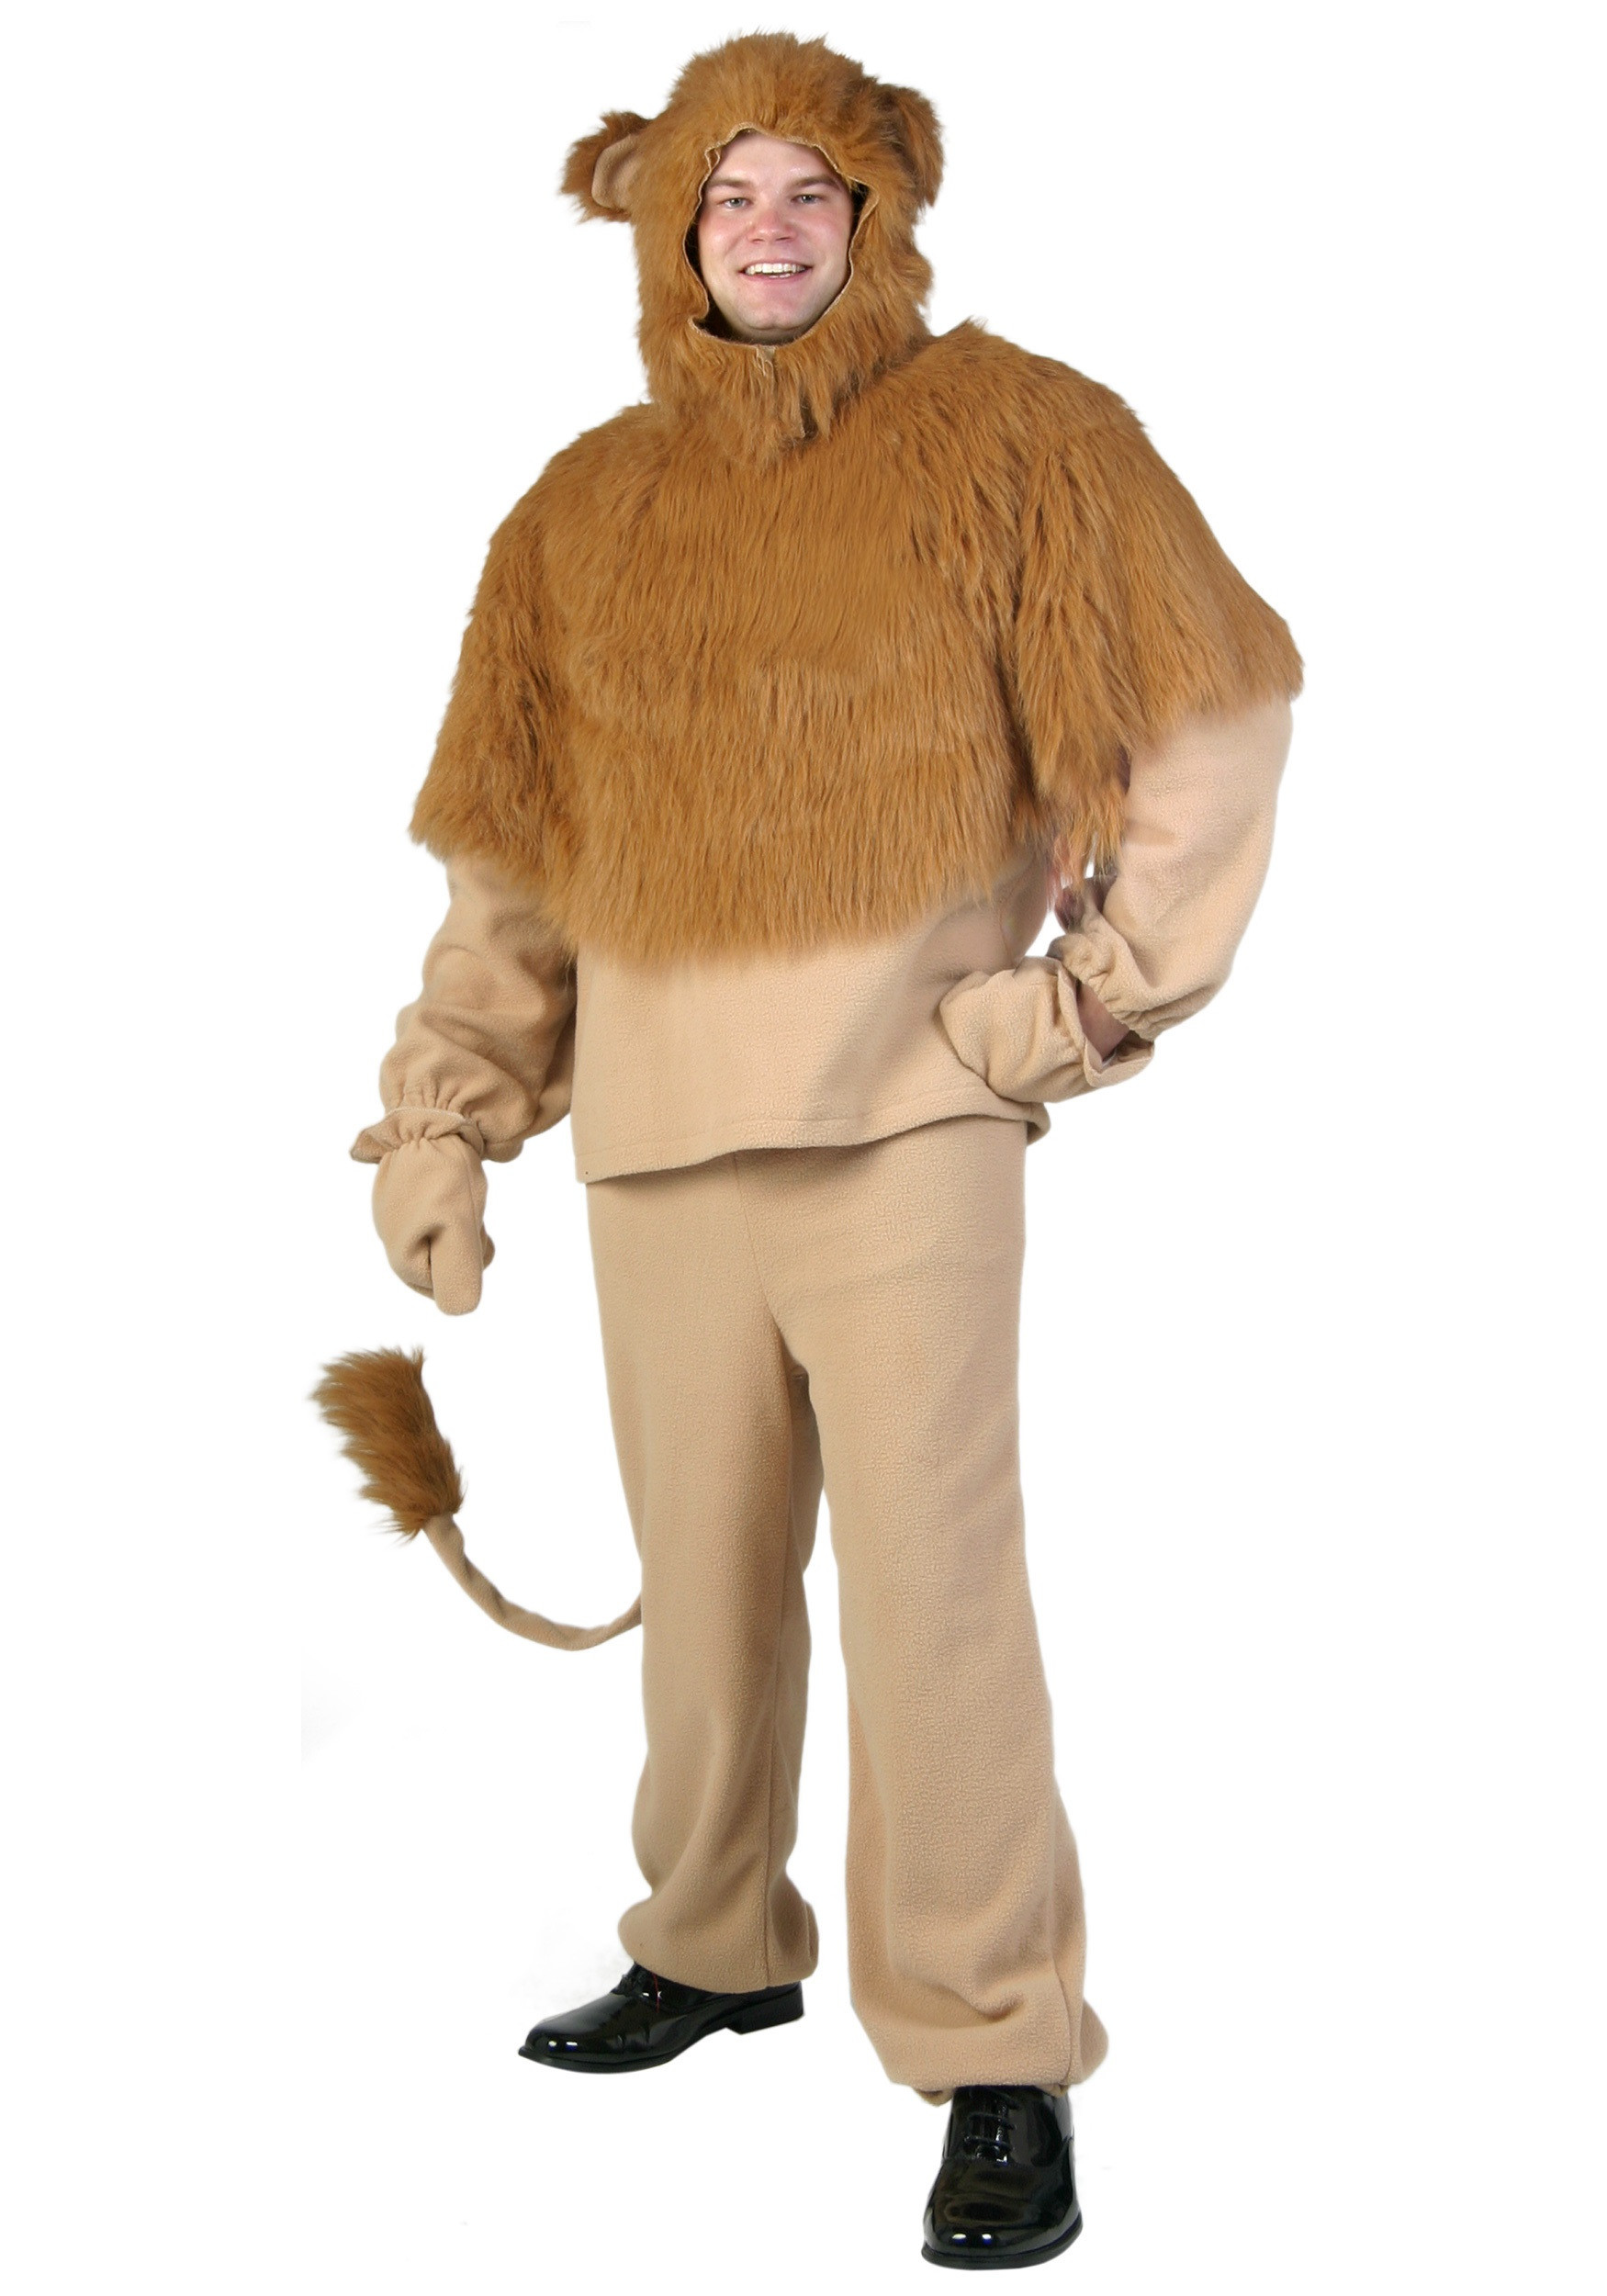 DIY Lion Costume For Adults
 Adult Storybook Lion Costume